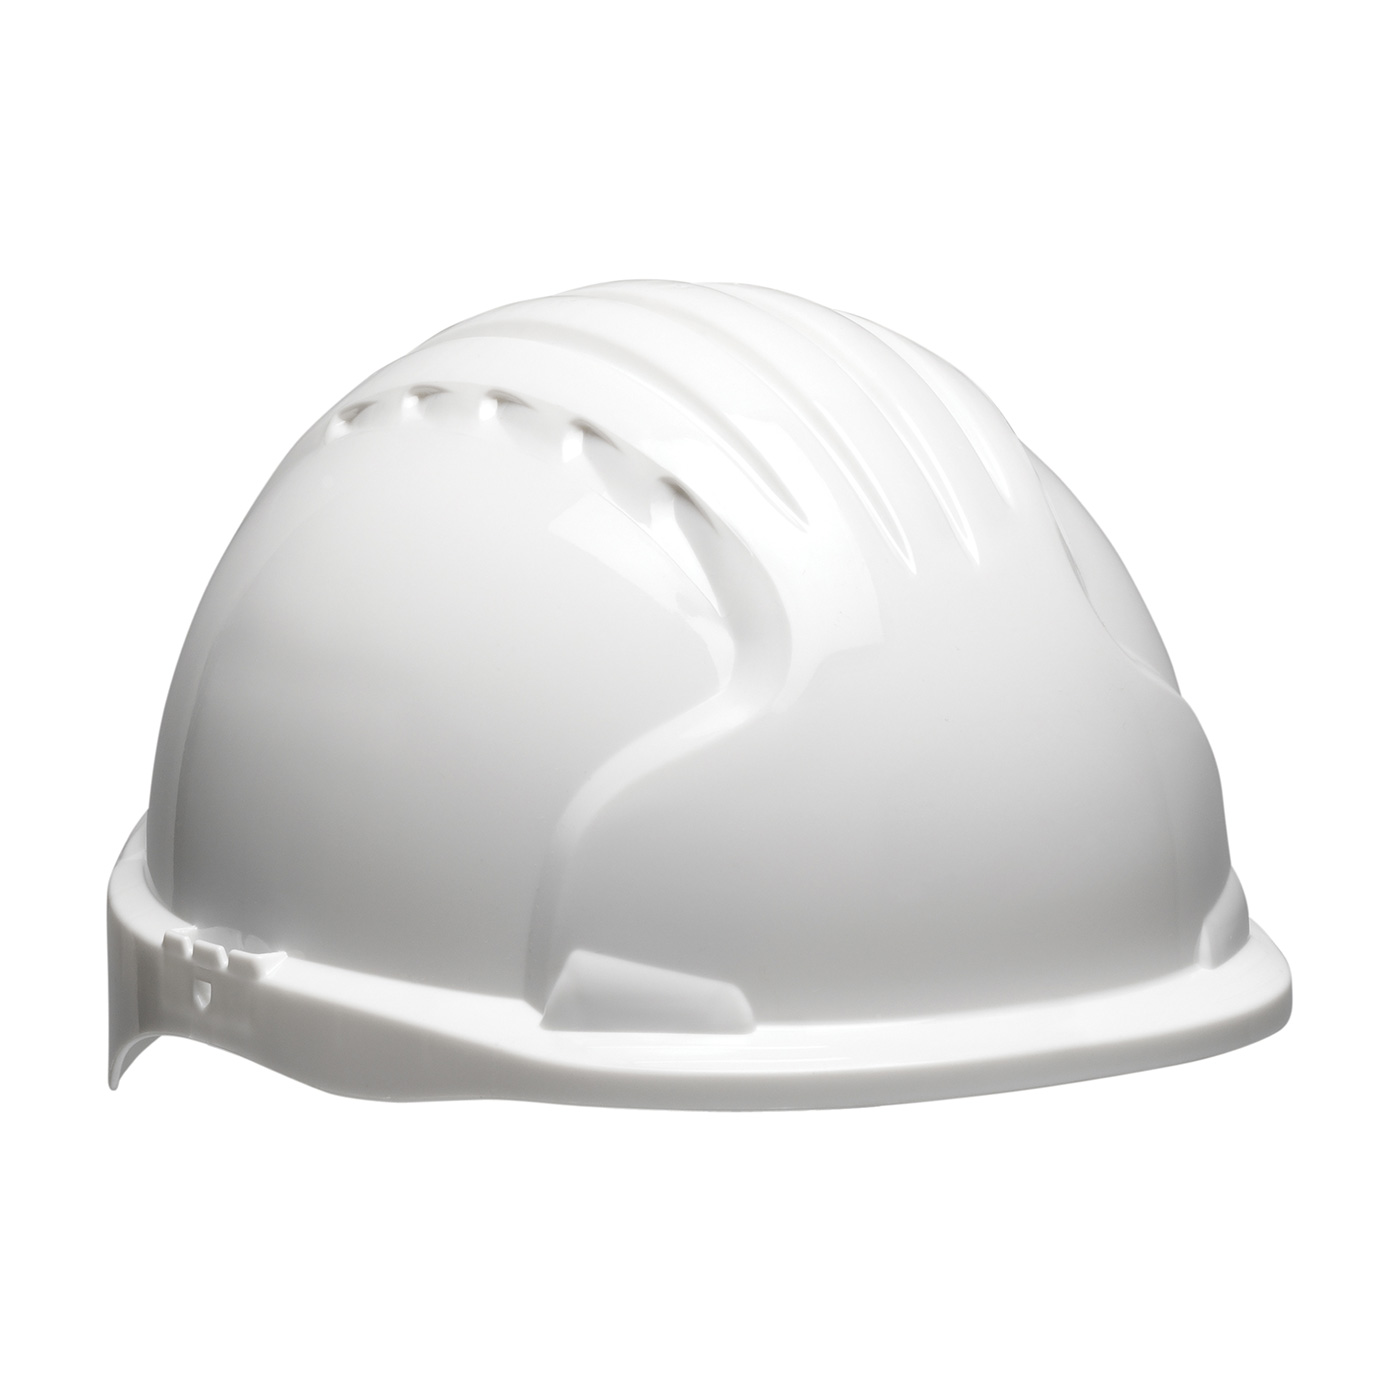 280-EV6151S PIP® Evolution® Deluxe 6151 Short Brim Hard Hat with HDPE Shell, 6-Point Polyester Suspension and Wheel Ratchet Adjustment - White